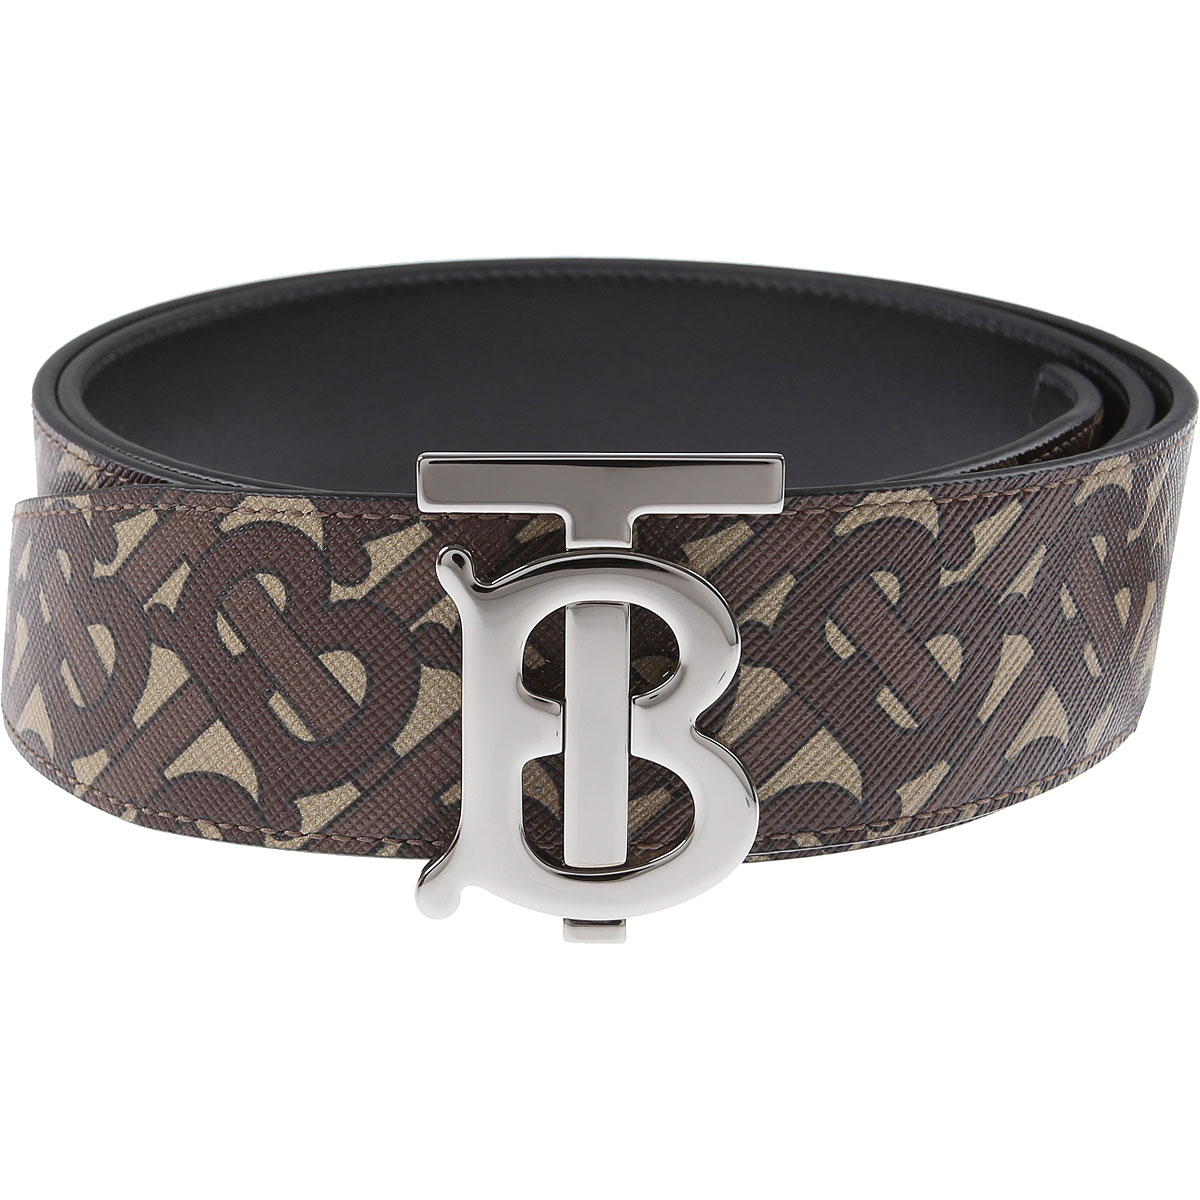 Mens Belts Burberry, Style code: 8024192-a7432-